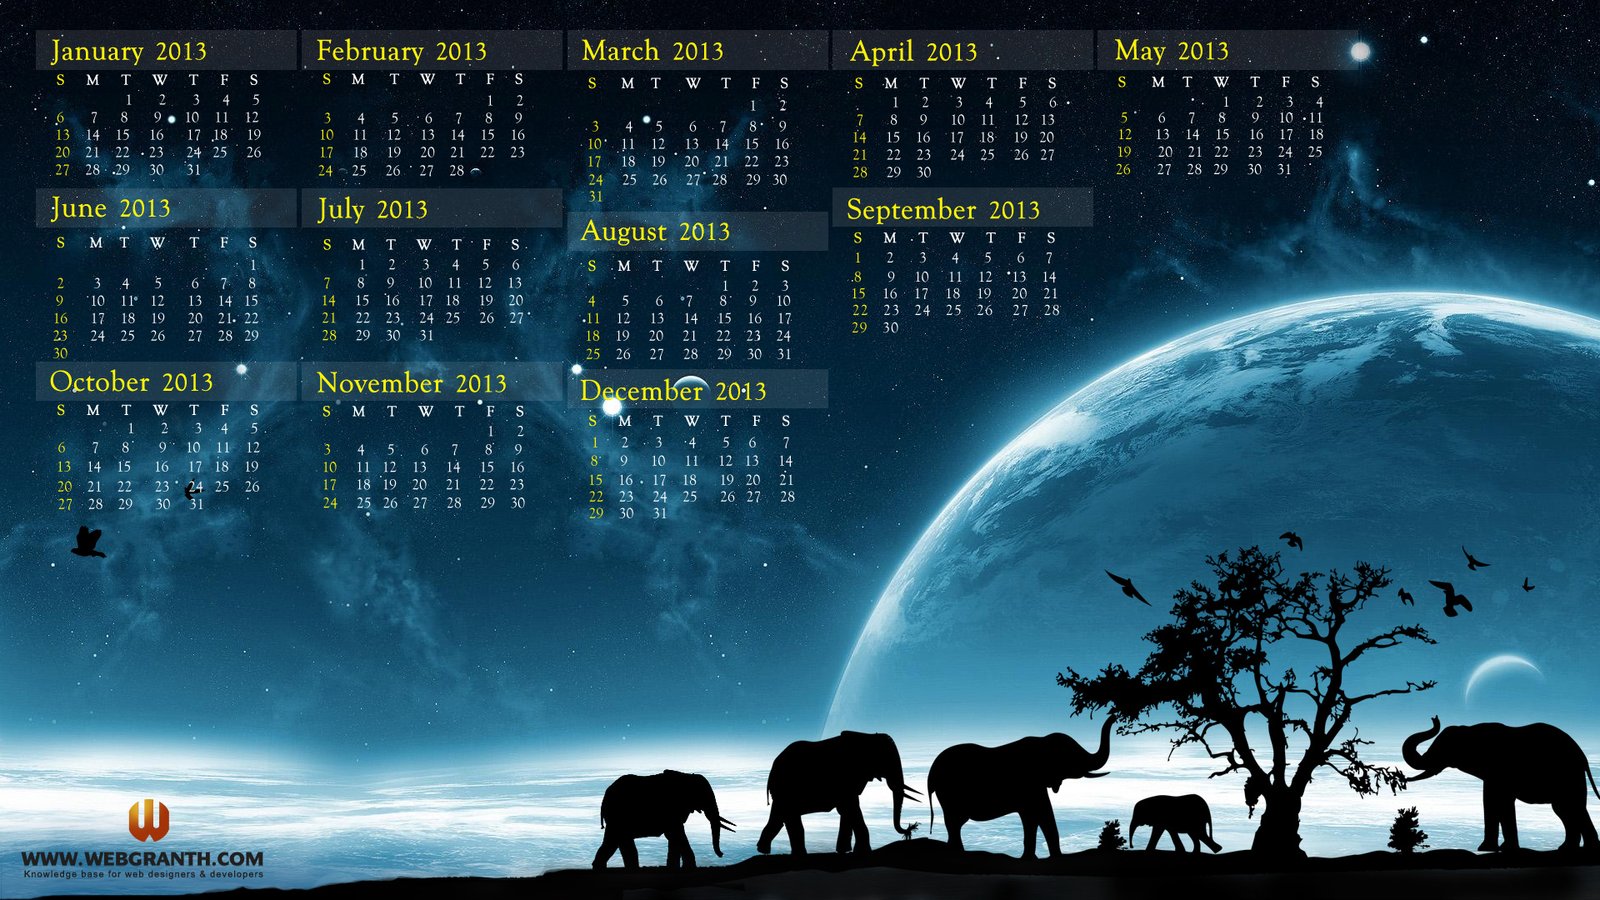 Animated HD Wallpaper calendar 2013 (1): View HD Image of Animated HD